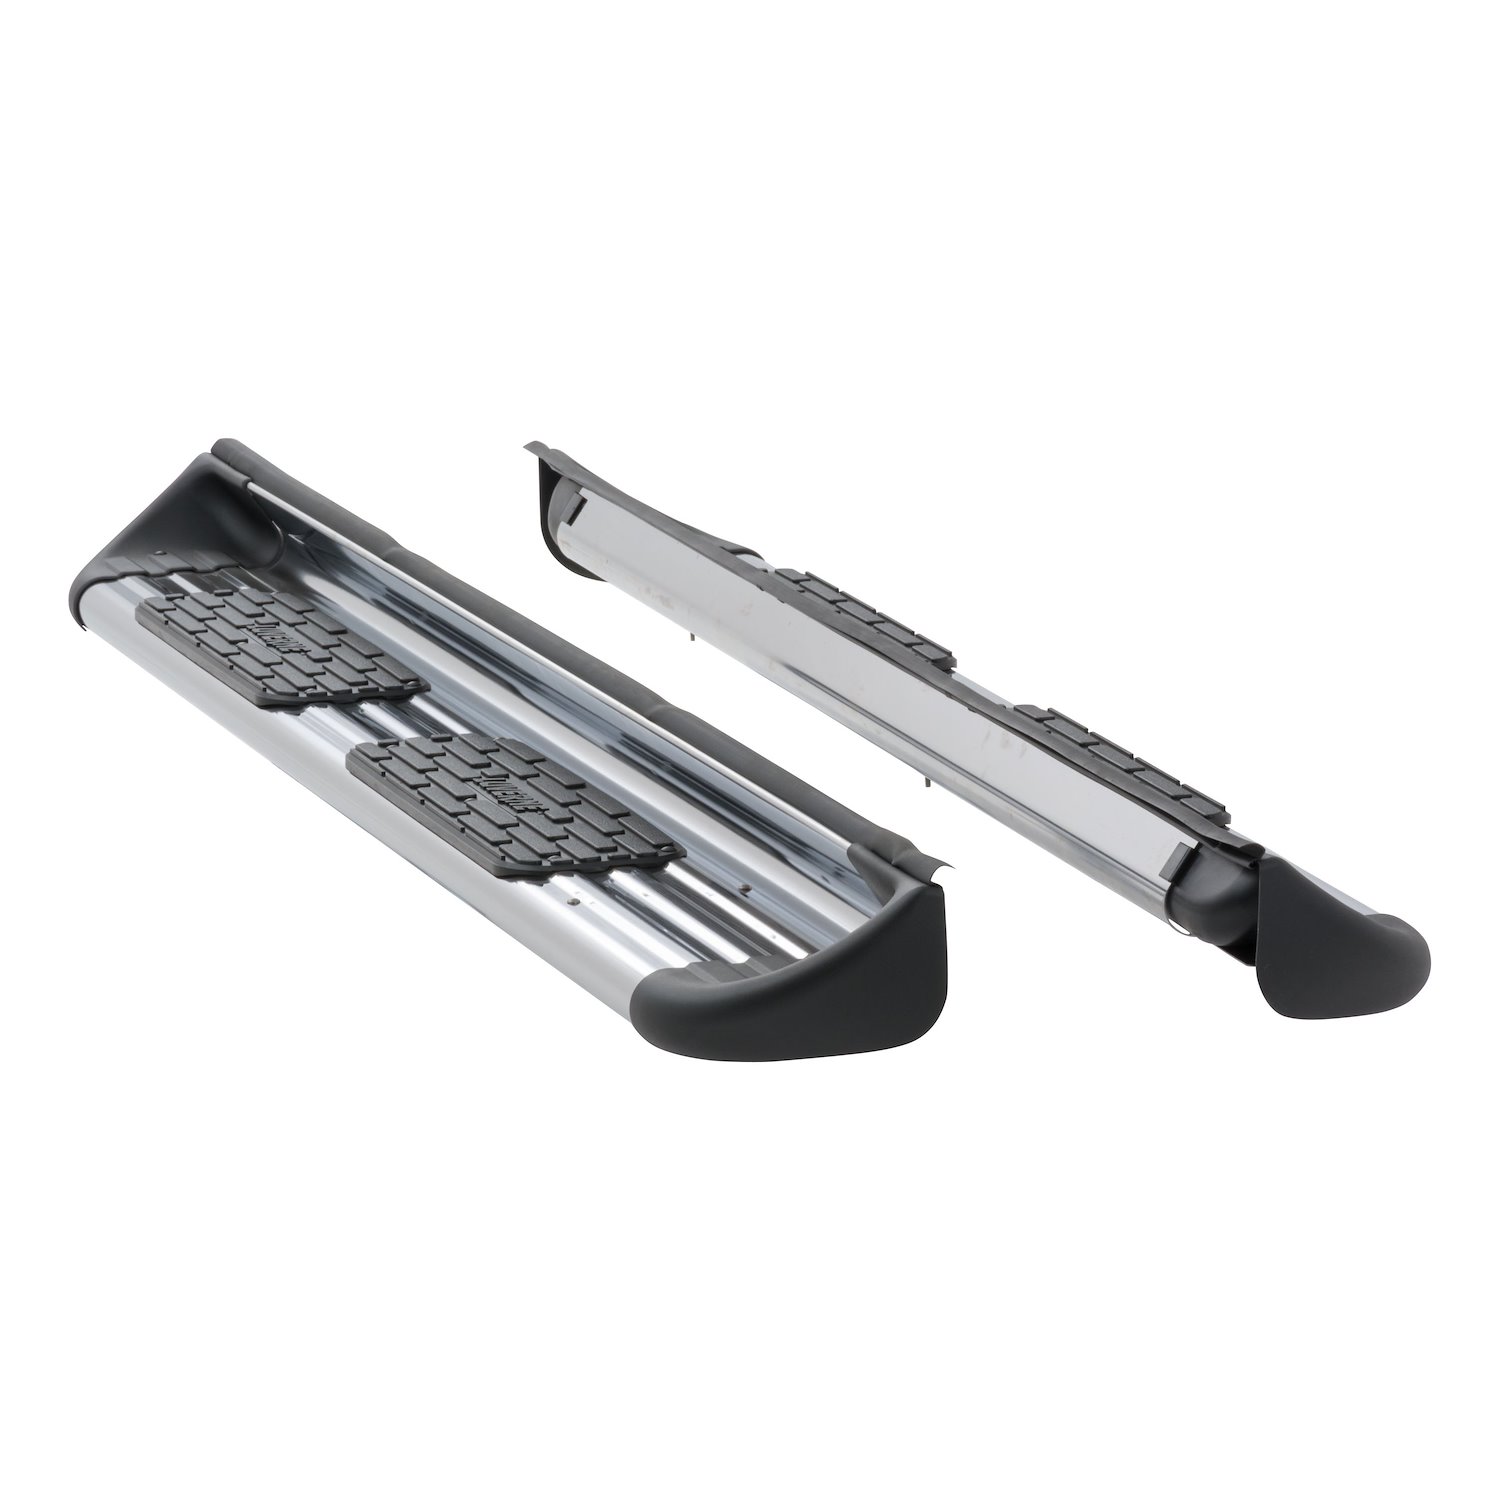 489922-579922 Polished Stainless Steel Side Entry Steps Fits Select Ford Super Duty Extended Cab